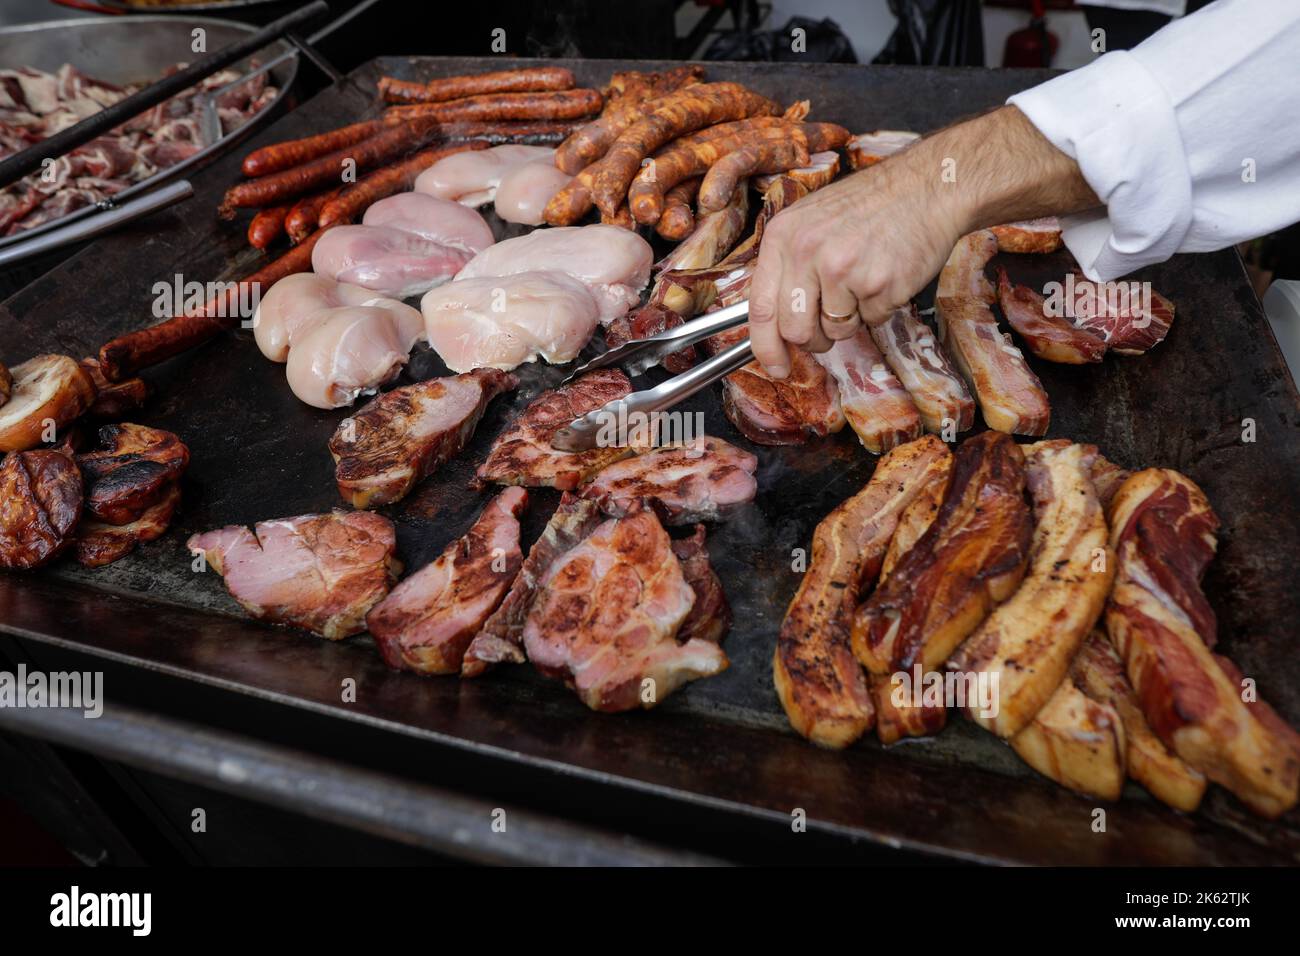 Shallow depth of field (selective focus) details with a man grilling various kinds of meat (pork, chicken, sausages) on a metal hotplate. Stock Photo